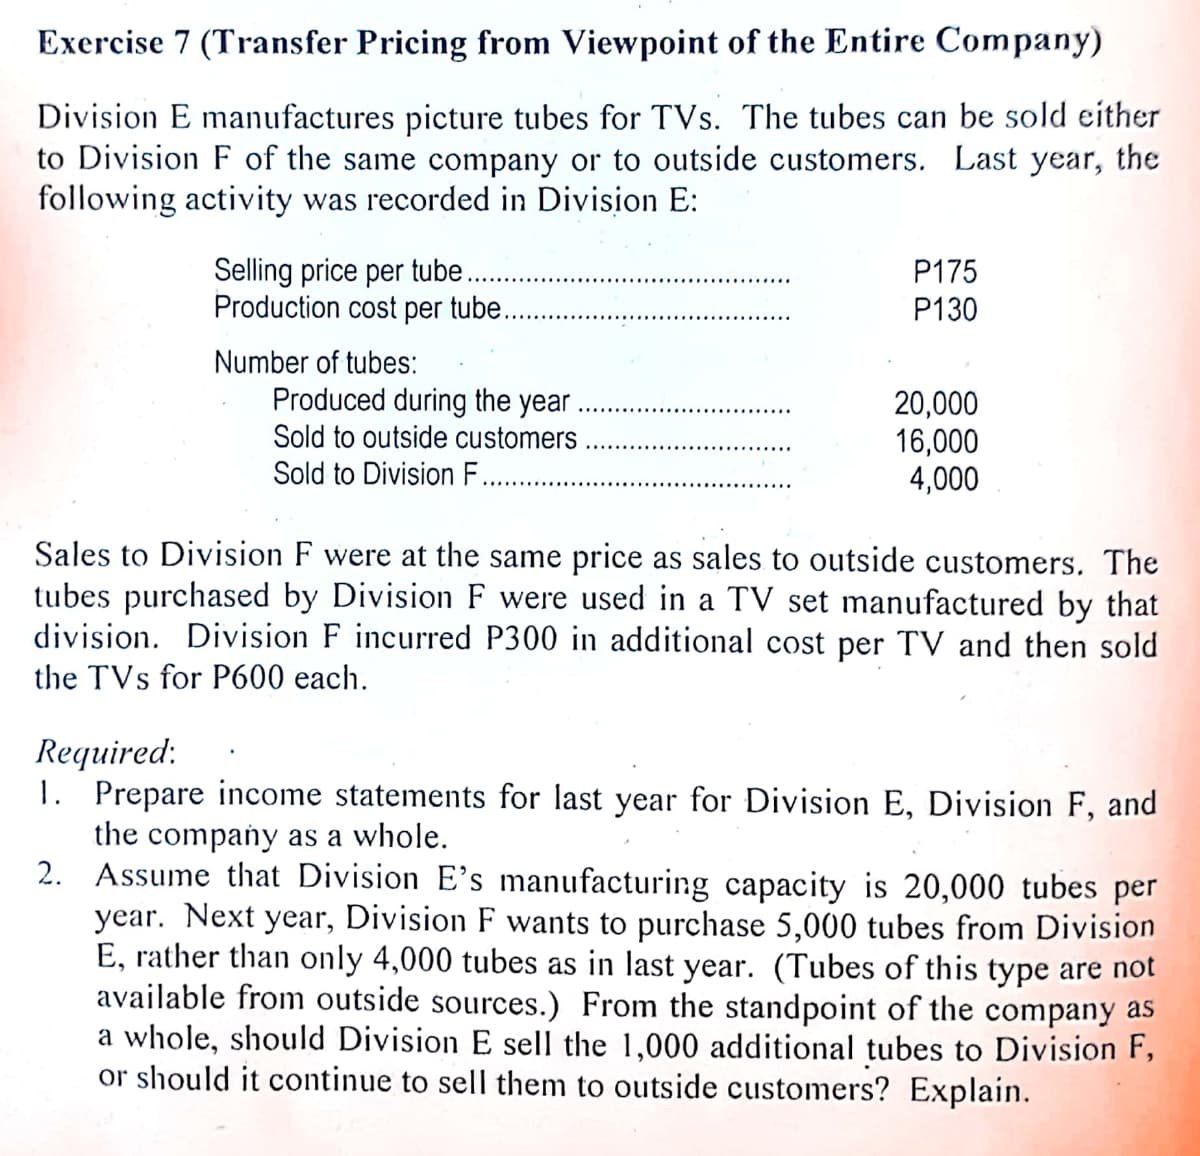 Exercise 7 (Transfer Pricing from Viewpoint of the Entire Company)
Division E manufactures picture tubes for TVs. The tubes can be sold either
to Division F of the same company or to outside customers. Last year, the
following activity was recorded in Division E:
Selling price per tube..
Production cost per tube...
P175
P130
Number of tubes:
Produced during the year
20,000
16,000
4,000
Sold to outside customers
Sold to Division F.
Sales to Division F were at the same price as sales to outside customers. The
tubes purchased by Division F were used in a TV set manufactured by that
division. Division F incurred P300 in additional cost per TV and then sold
the TVs for P600 each.
Required:
1. Prepare income statements for last year for Division E, Division F, and
the company as a whole.
2. Assume that Division E's manufacturing capacity is 20,000 tubes per
year. Next year, Division F wants to purchase 5,000 tubes from Division
E, rather than only 4,000 tubes as in last year. (Tubes of this type are not
available from outside sources.) From the standpoint of the company as
a whole, should Division E sell the 1,000 additional tubes to Division F,
or should it continue to sell them to outside customers? Explain.
